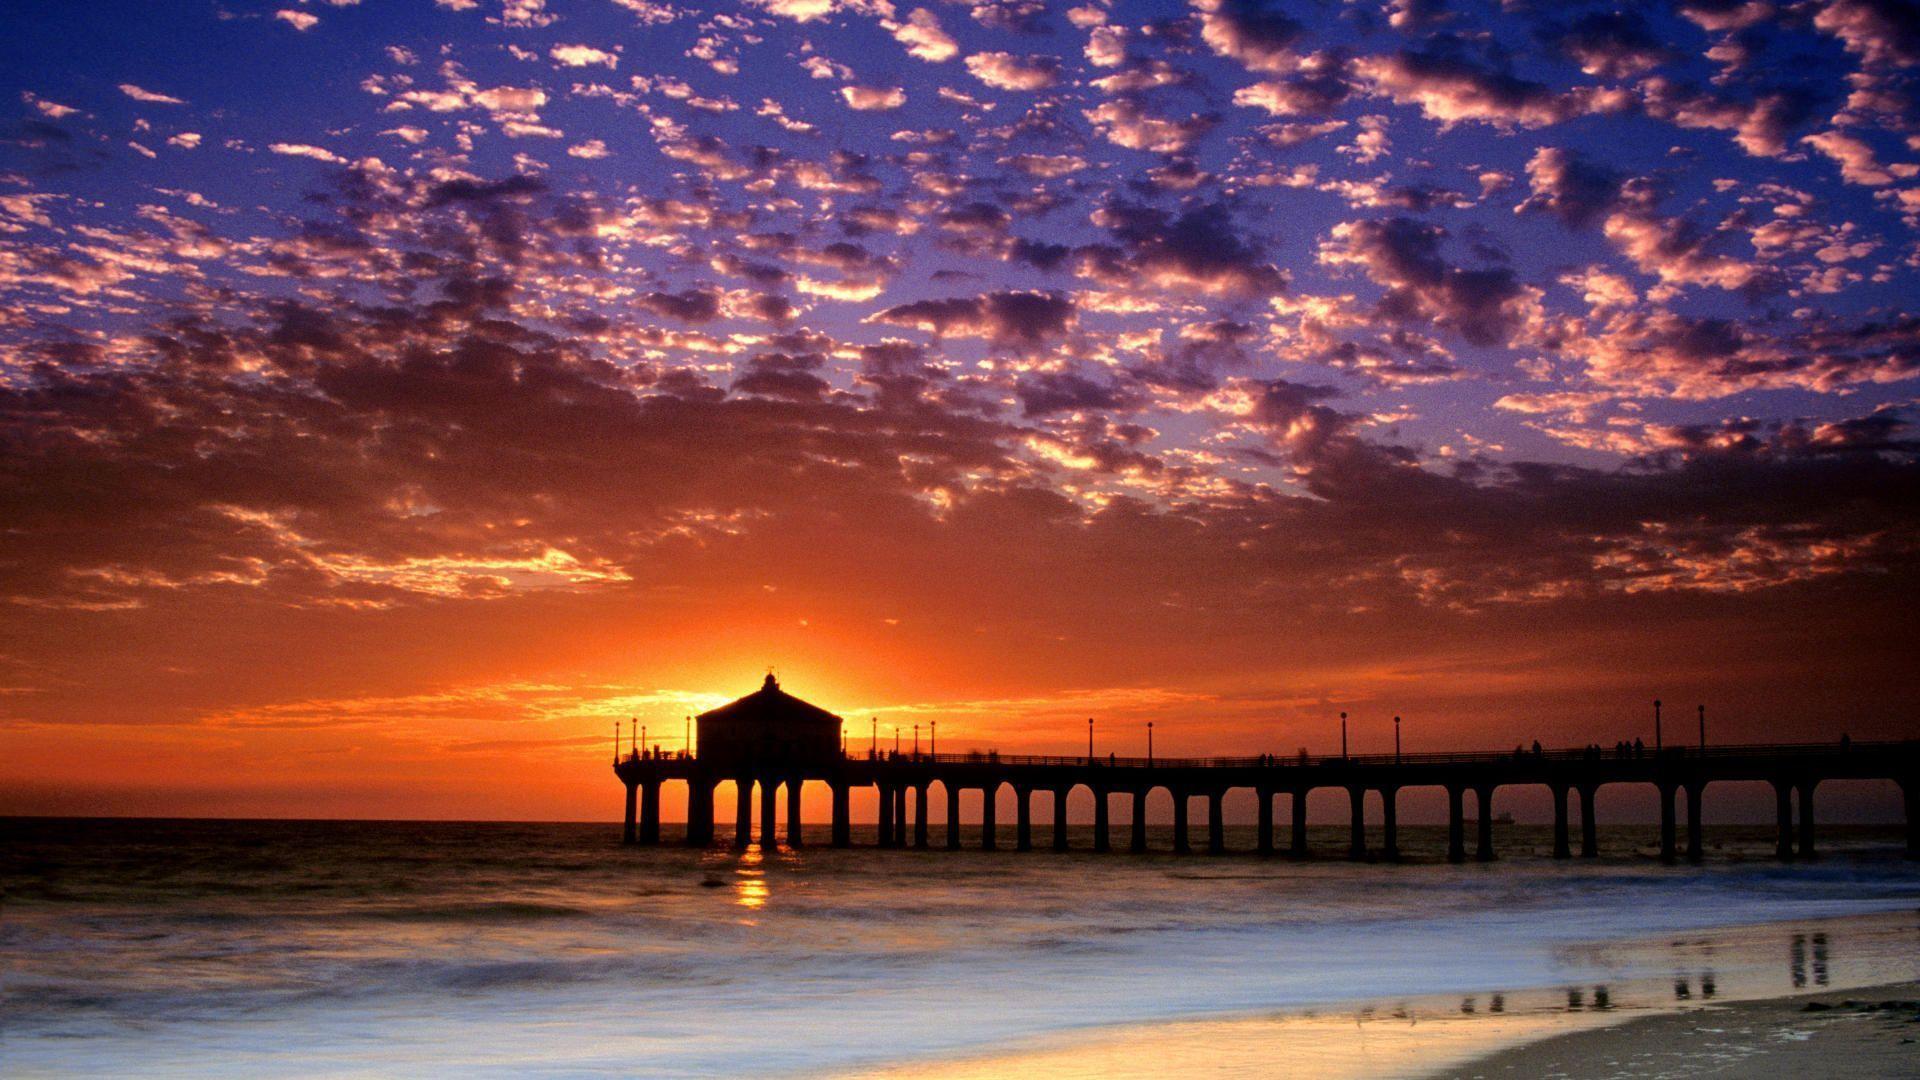 Cool Background California Beach Colorful Sky 1080x607px high